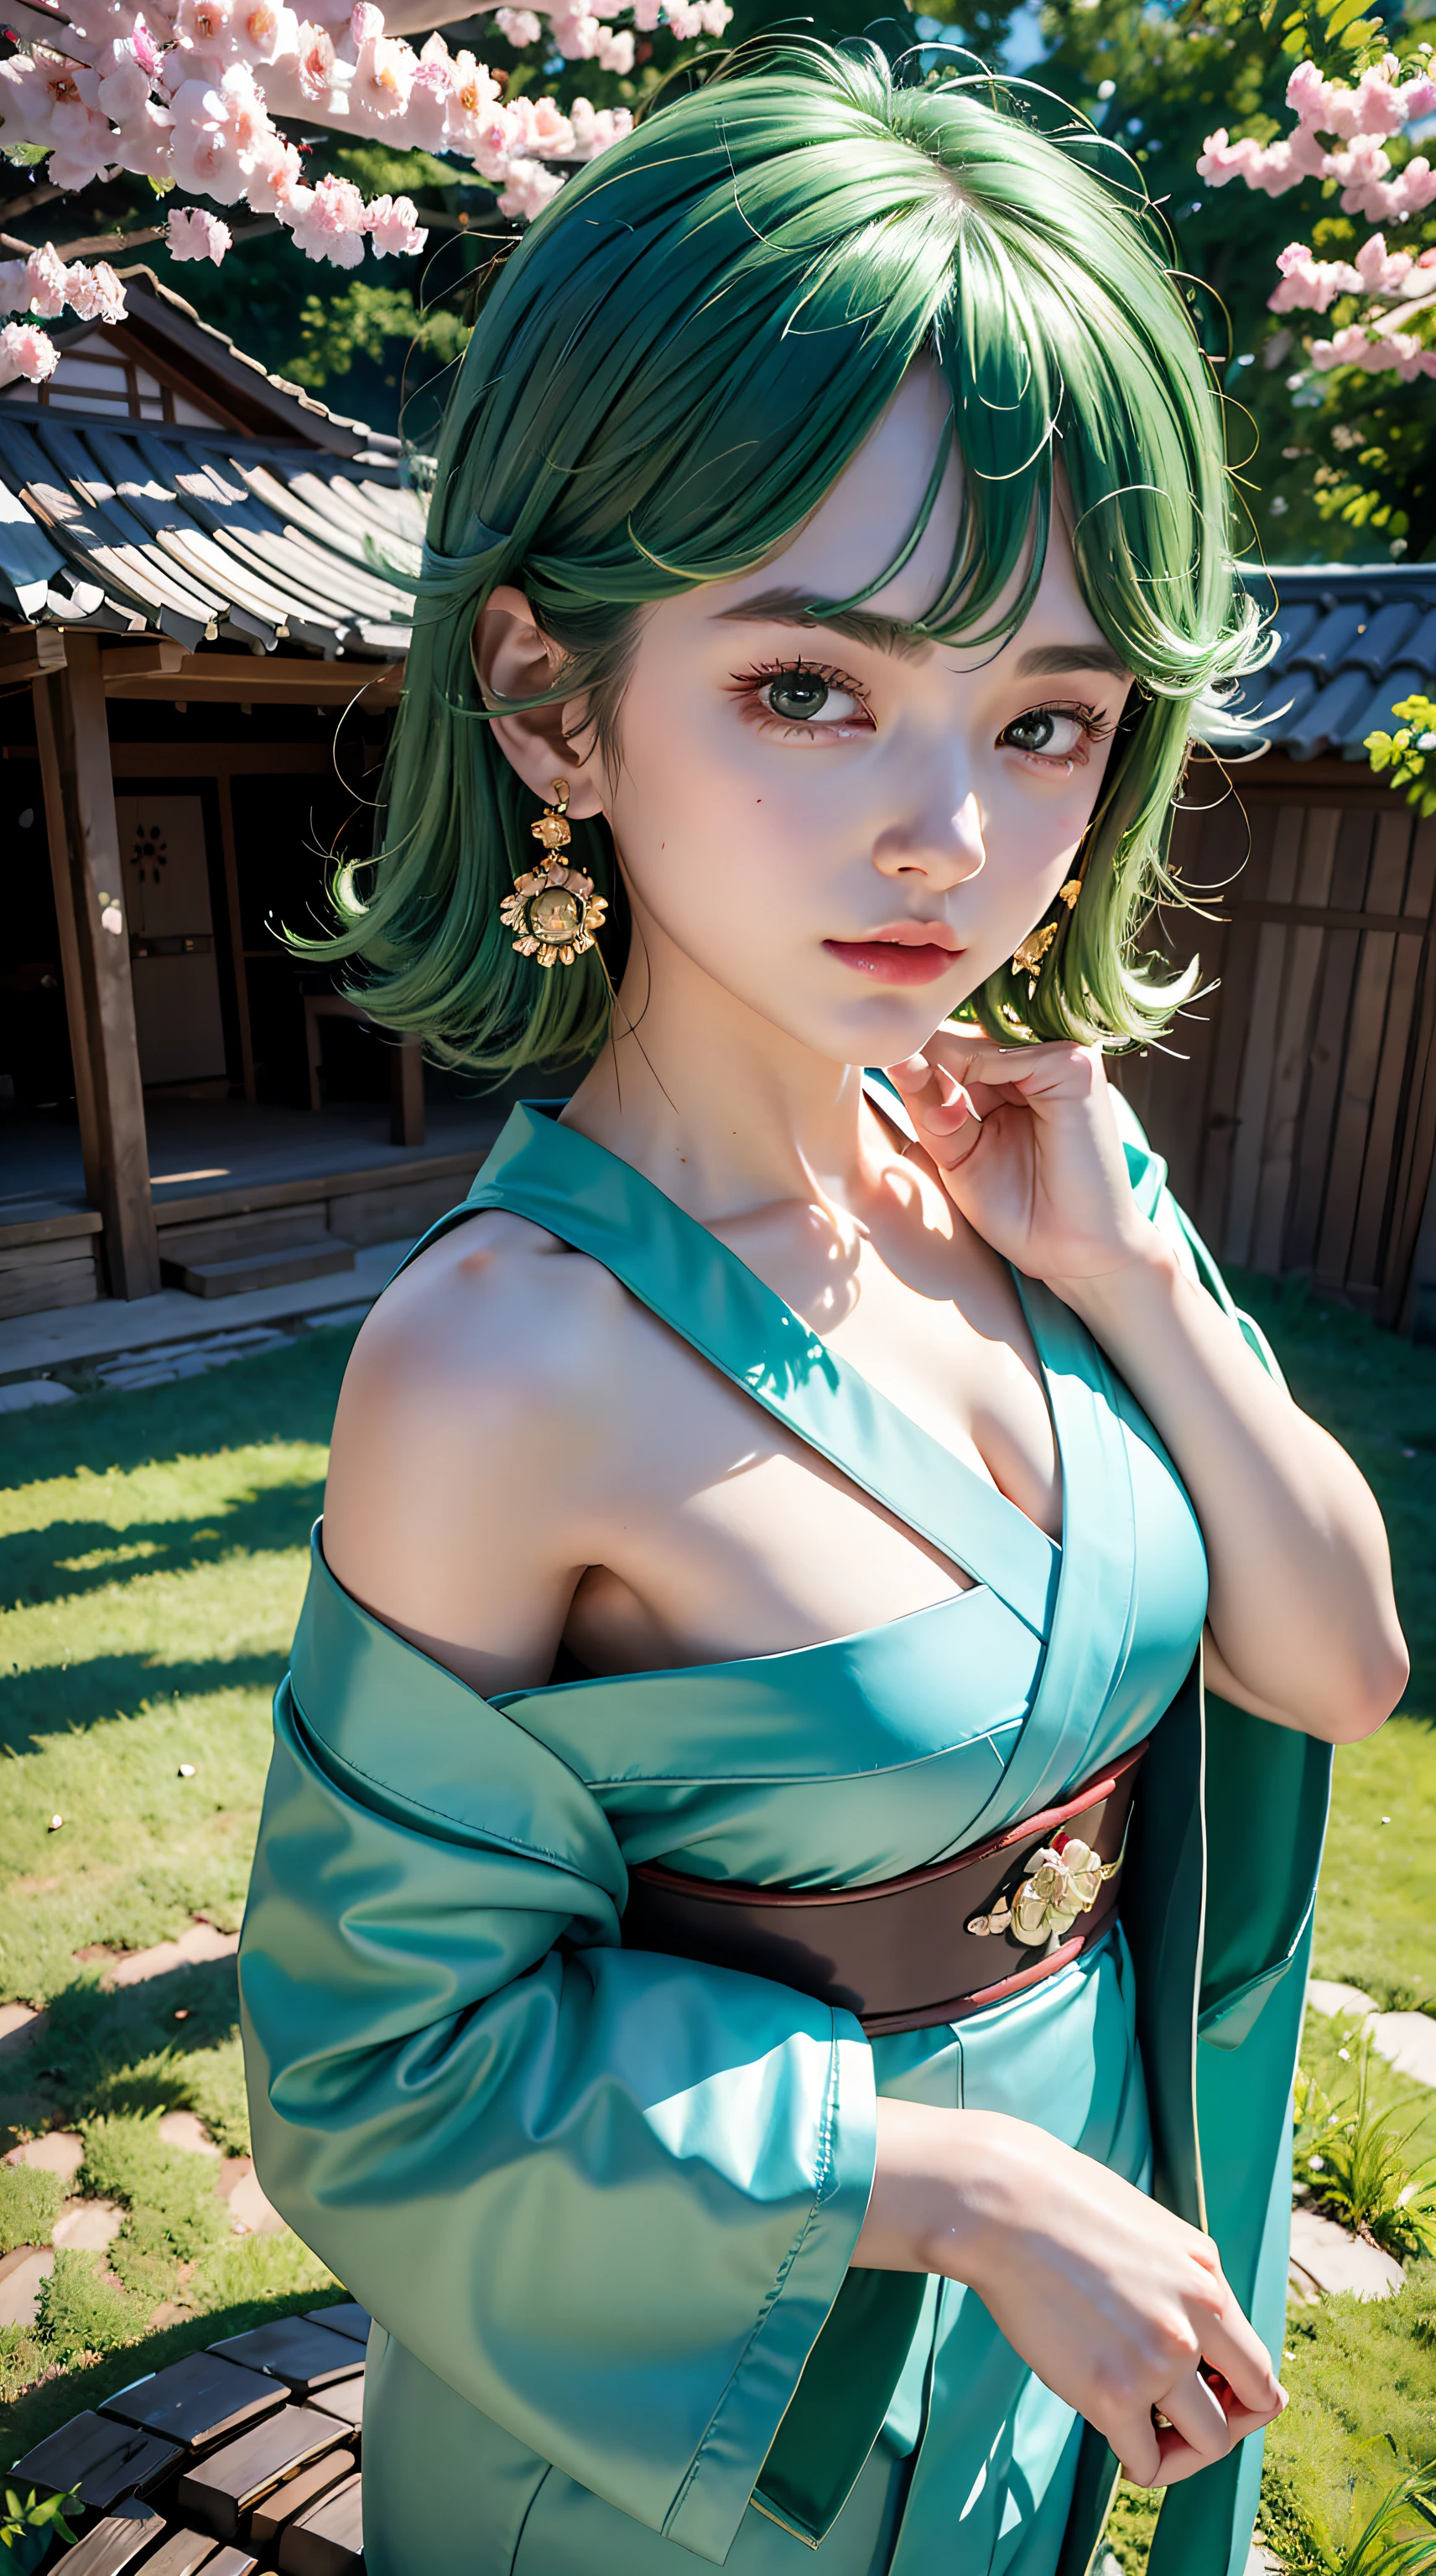 tatsumaki, green hair, hair in a bun, beautiful, beautiful woman, perfect body, perfect breasts, wearing a kimono, wearing earrings, wearing a watch, in the garden, cherry trees, traditional Japanese house, looking at the audience, a slight smile, realism, masterpiece, textured leather, super detailed, high detail, high quality, best quality, 1080p, 16k